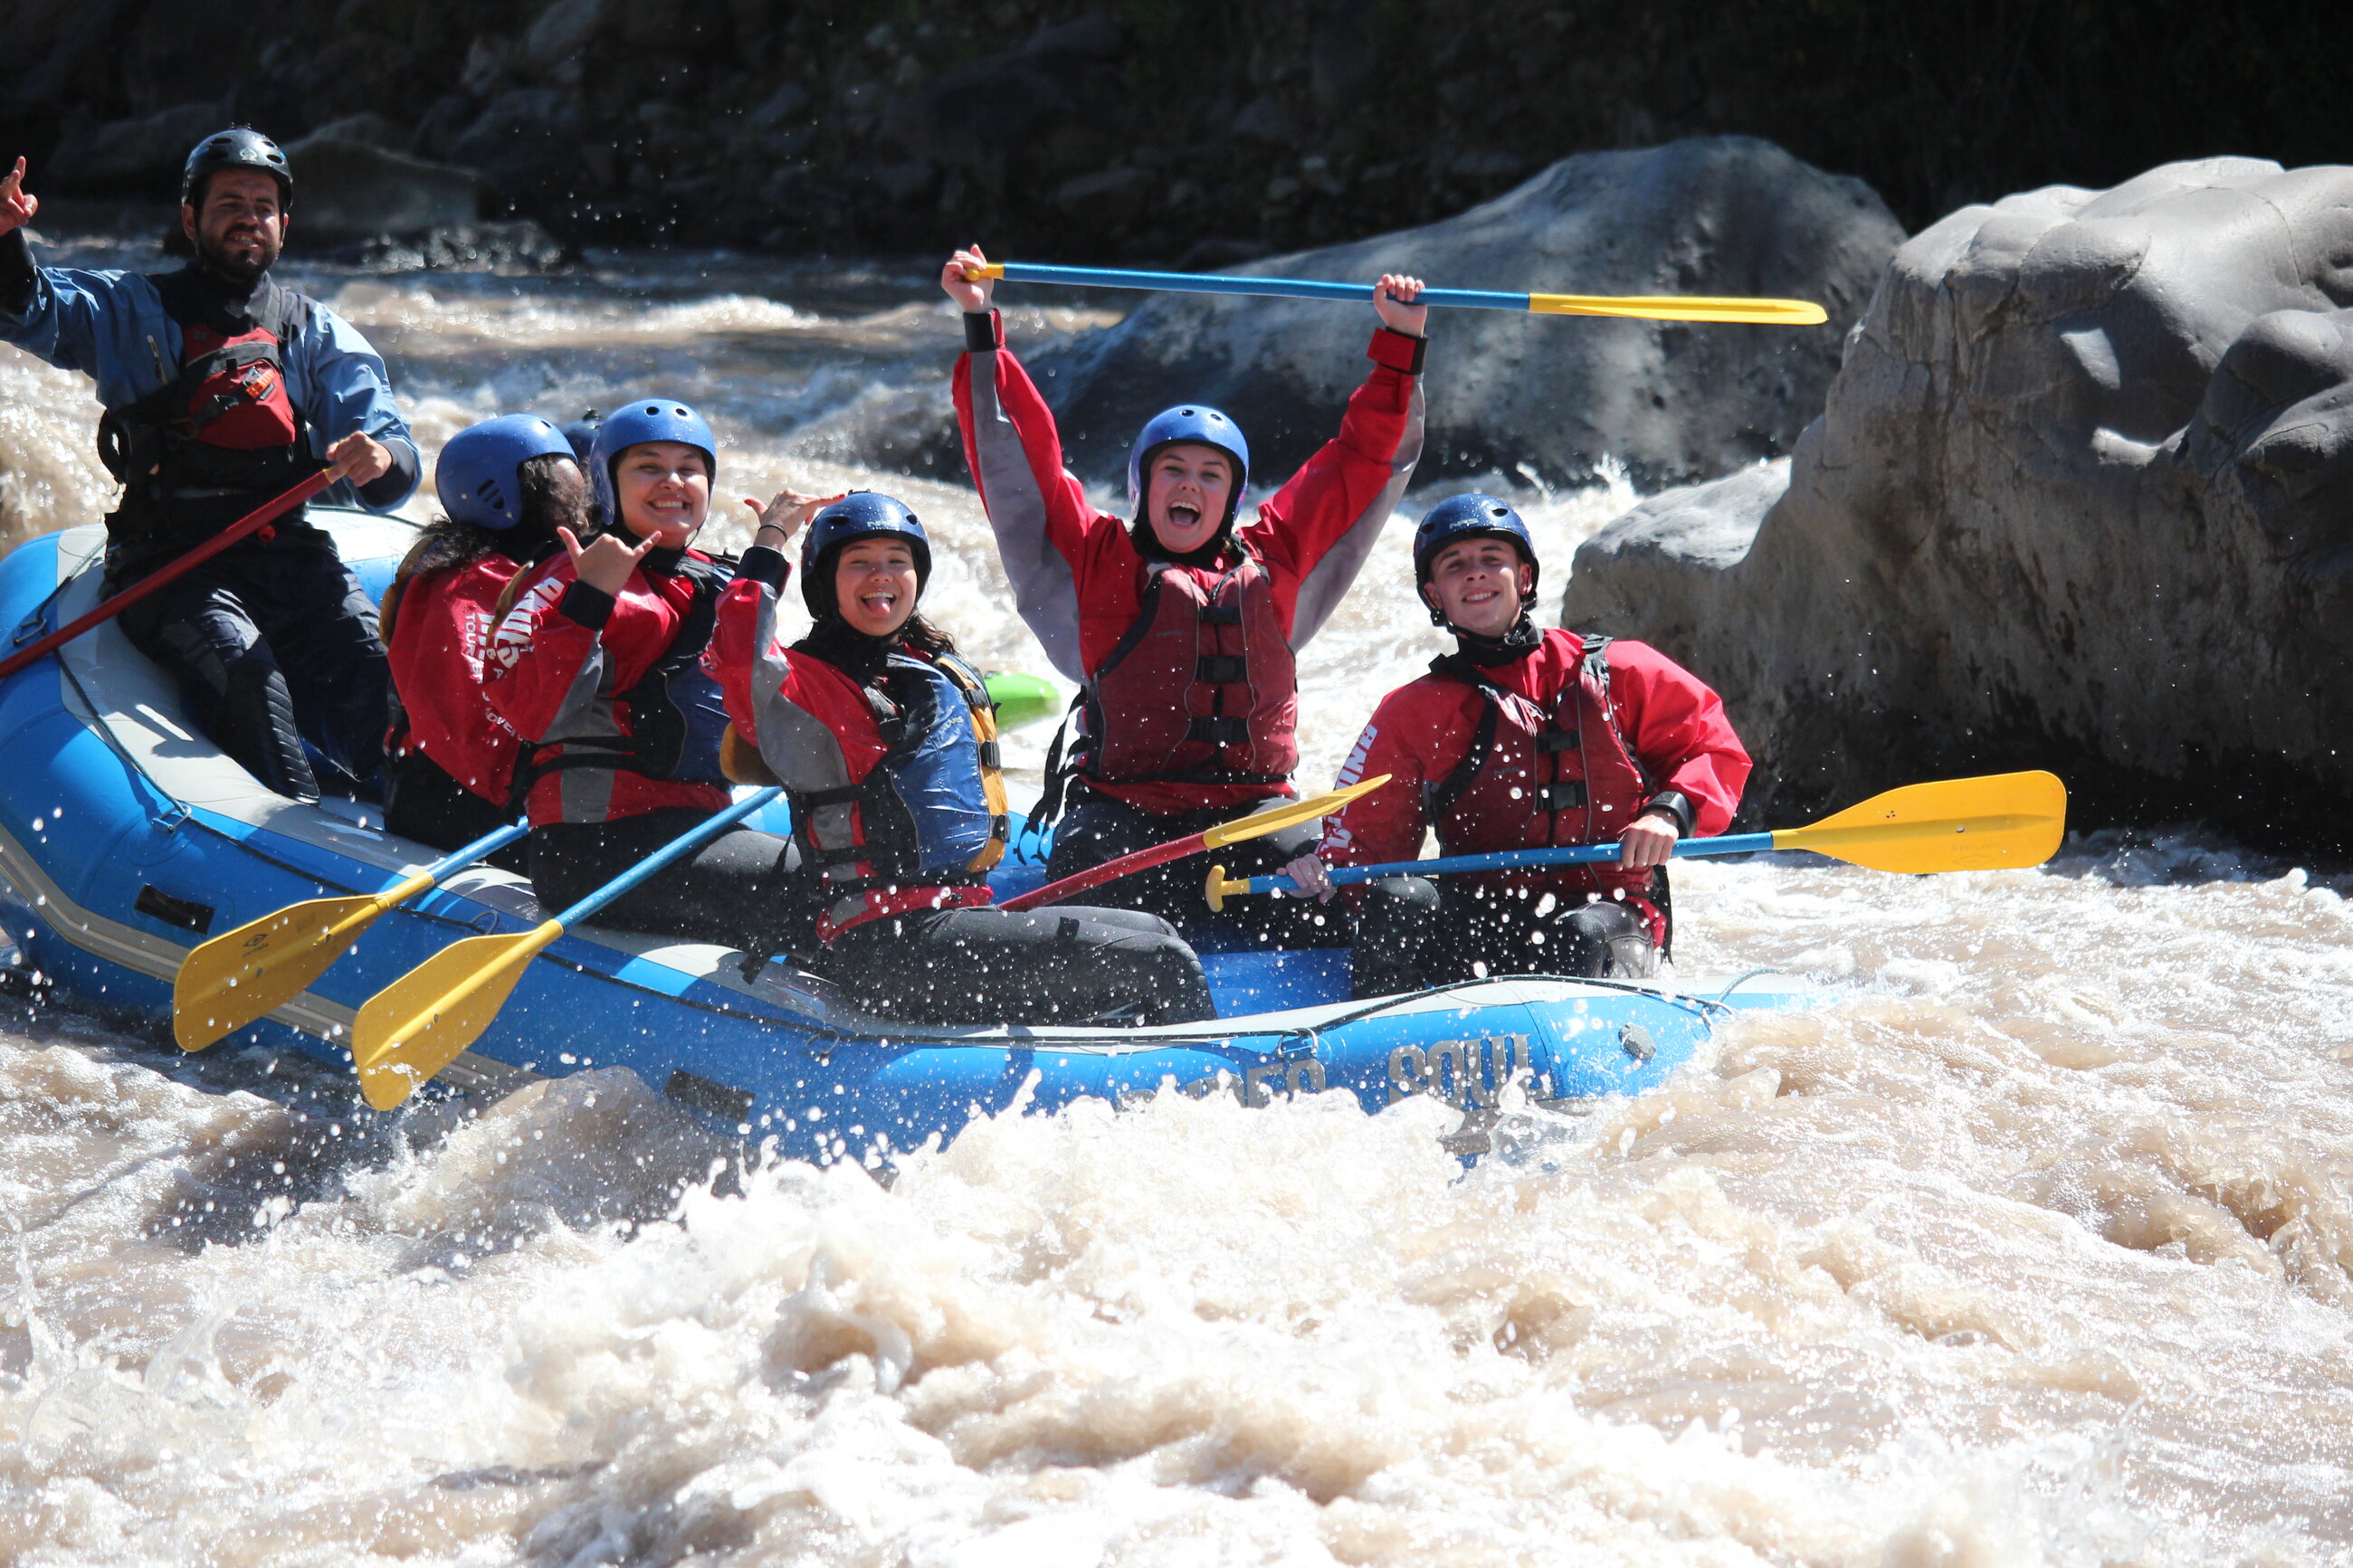 Whitewater rafting in the Andes!